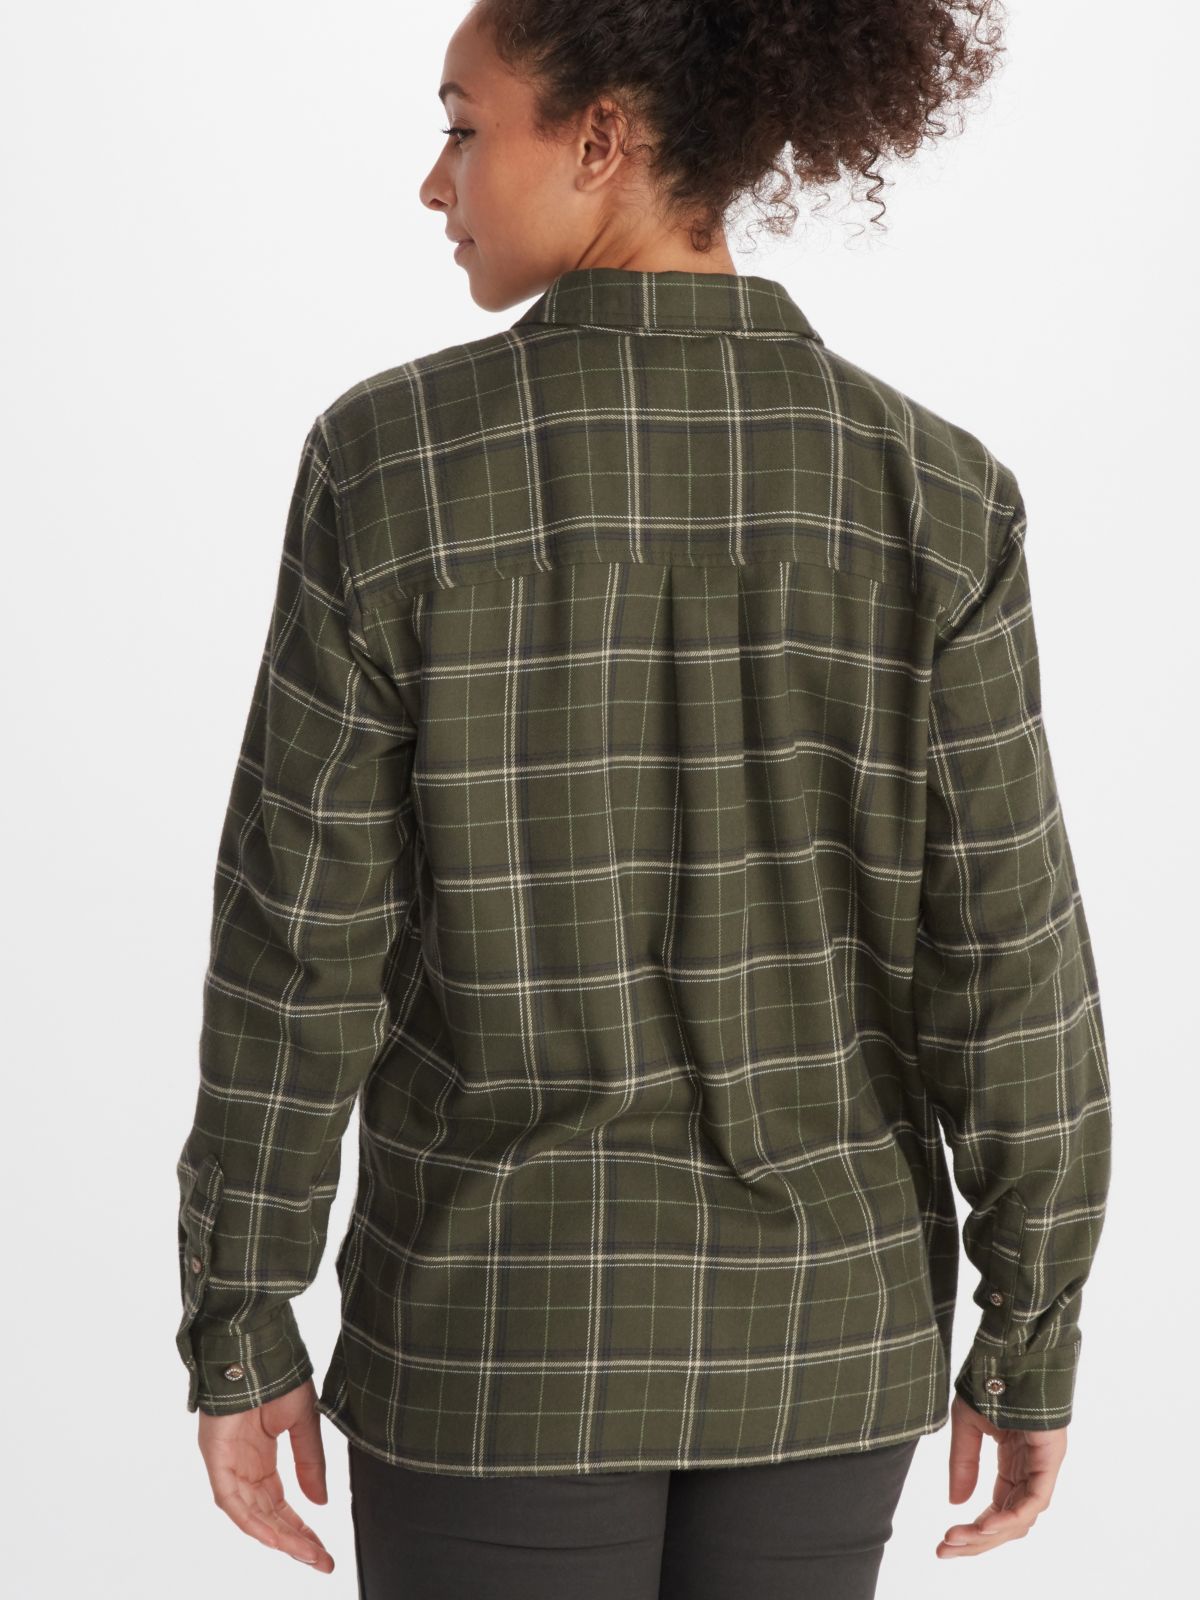 back of woman posing in outdoor clothing